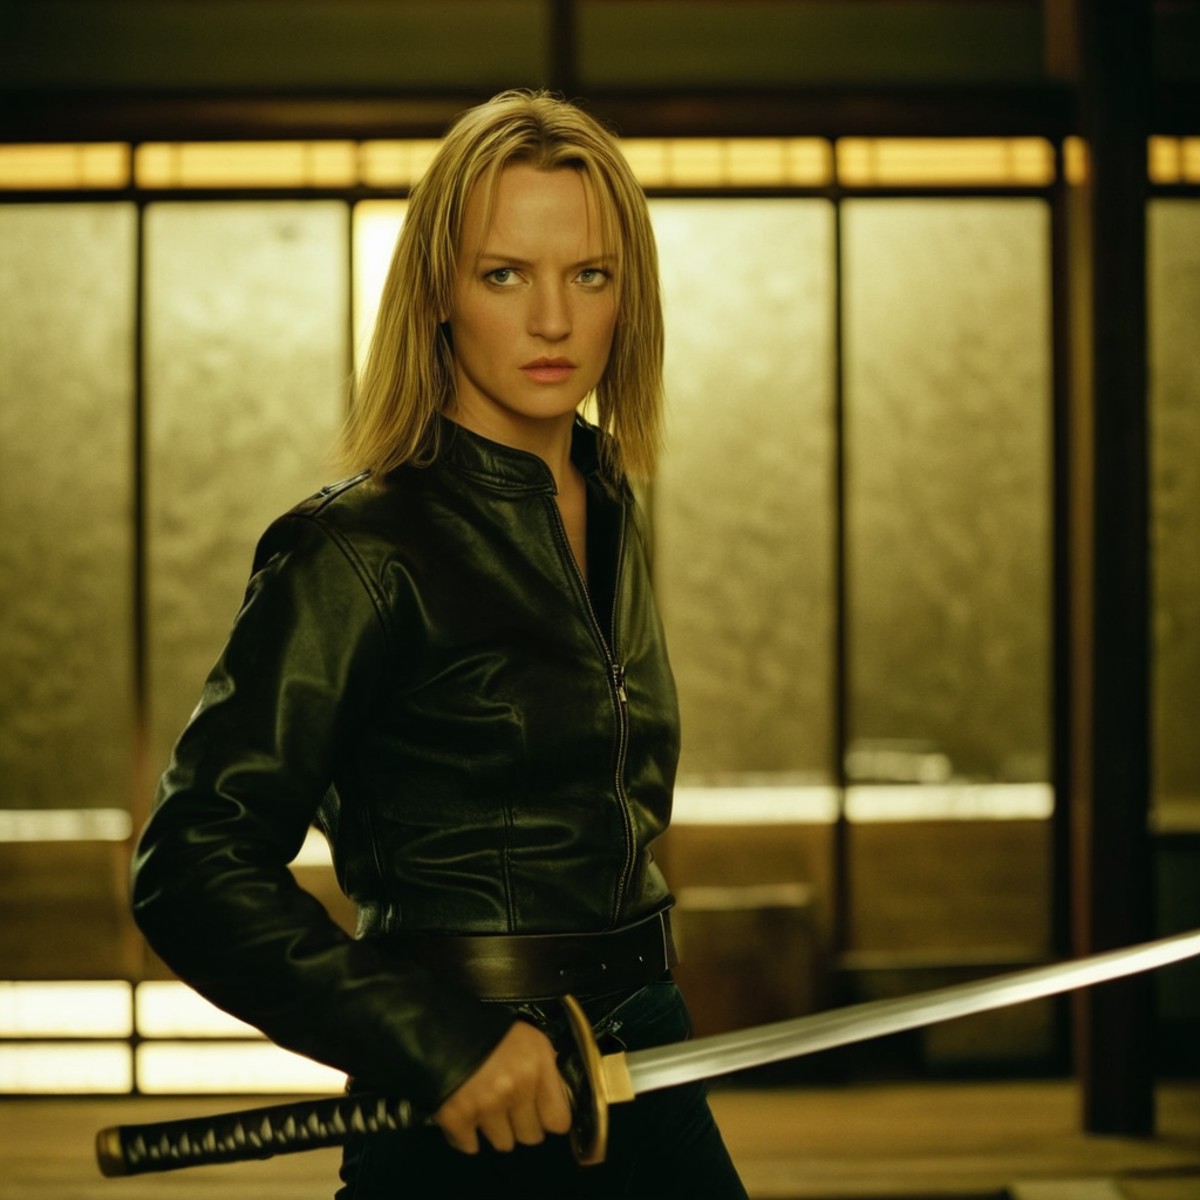 cinematic film still of  <lora:Kill Bill style:1>
Cinematic film image of The Blonde a woman in a leather jacket holding a...